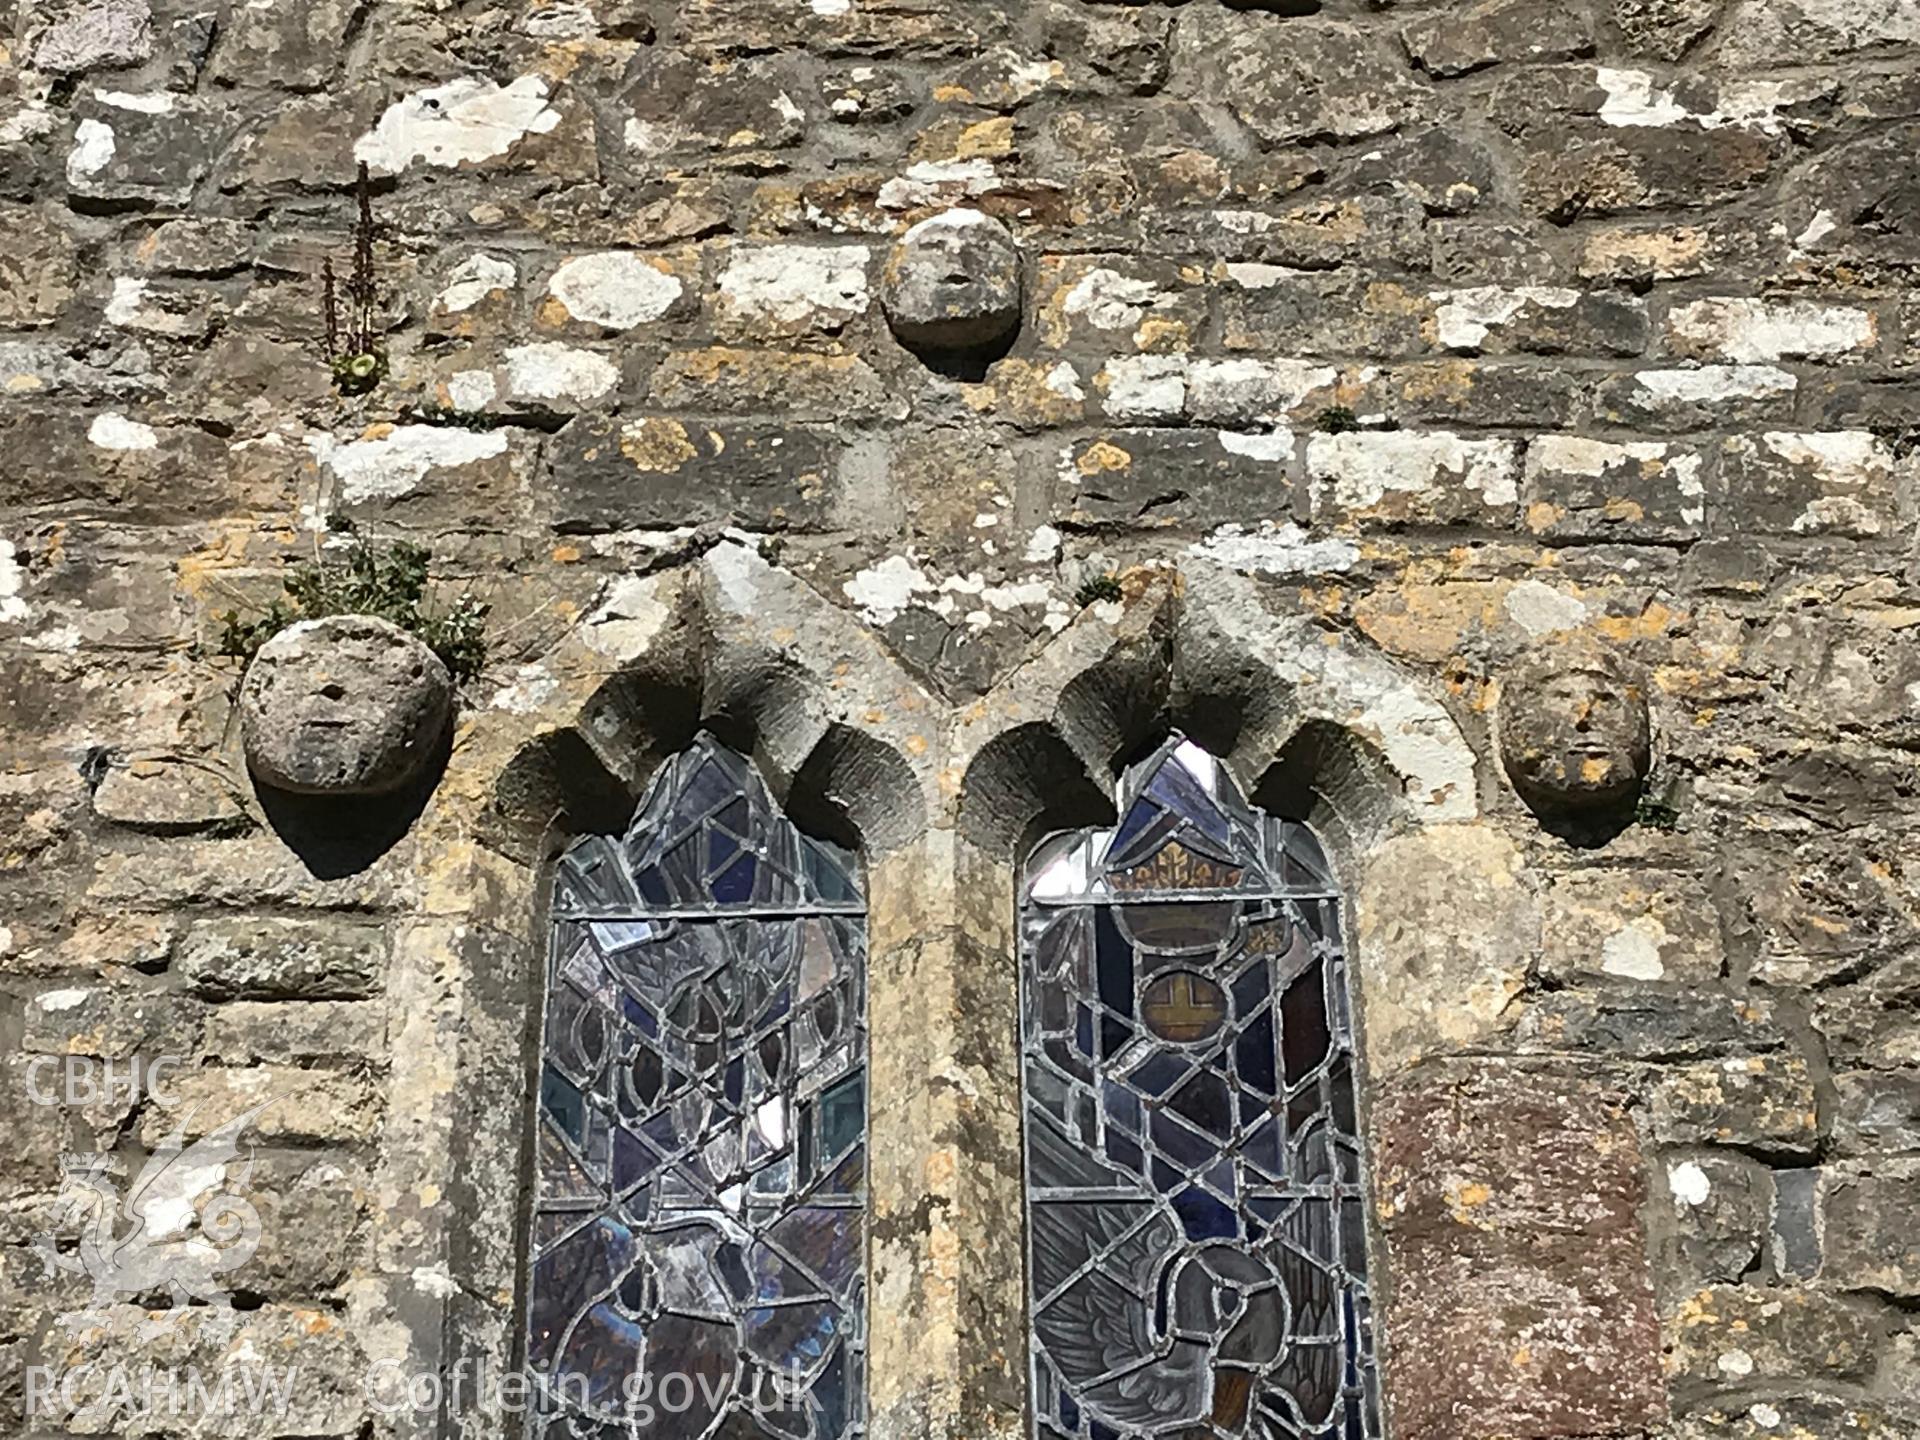 Digital colour photograph showing detailed exterior view of stained glass window and church face carvings at St. Cadog's Church, Cheriton, taken by Paul R. Davis on 5th May 2019.